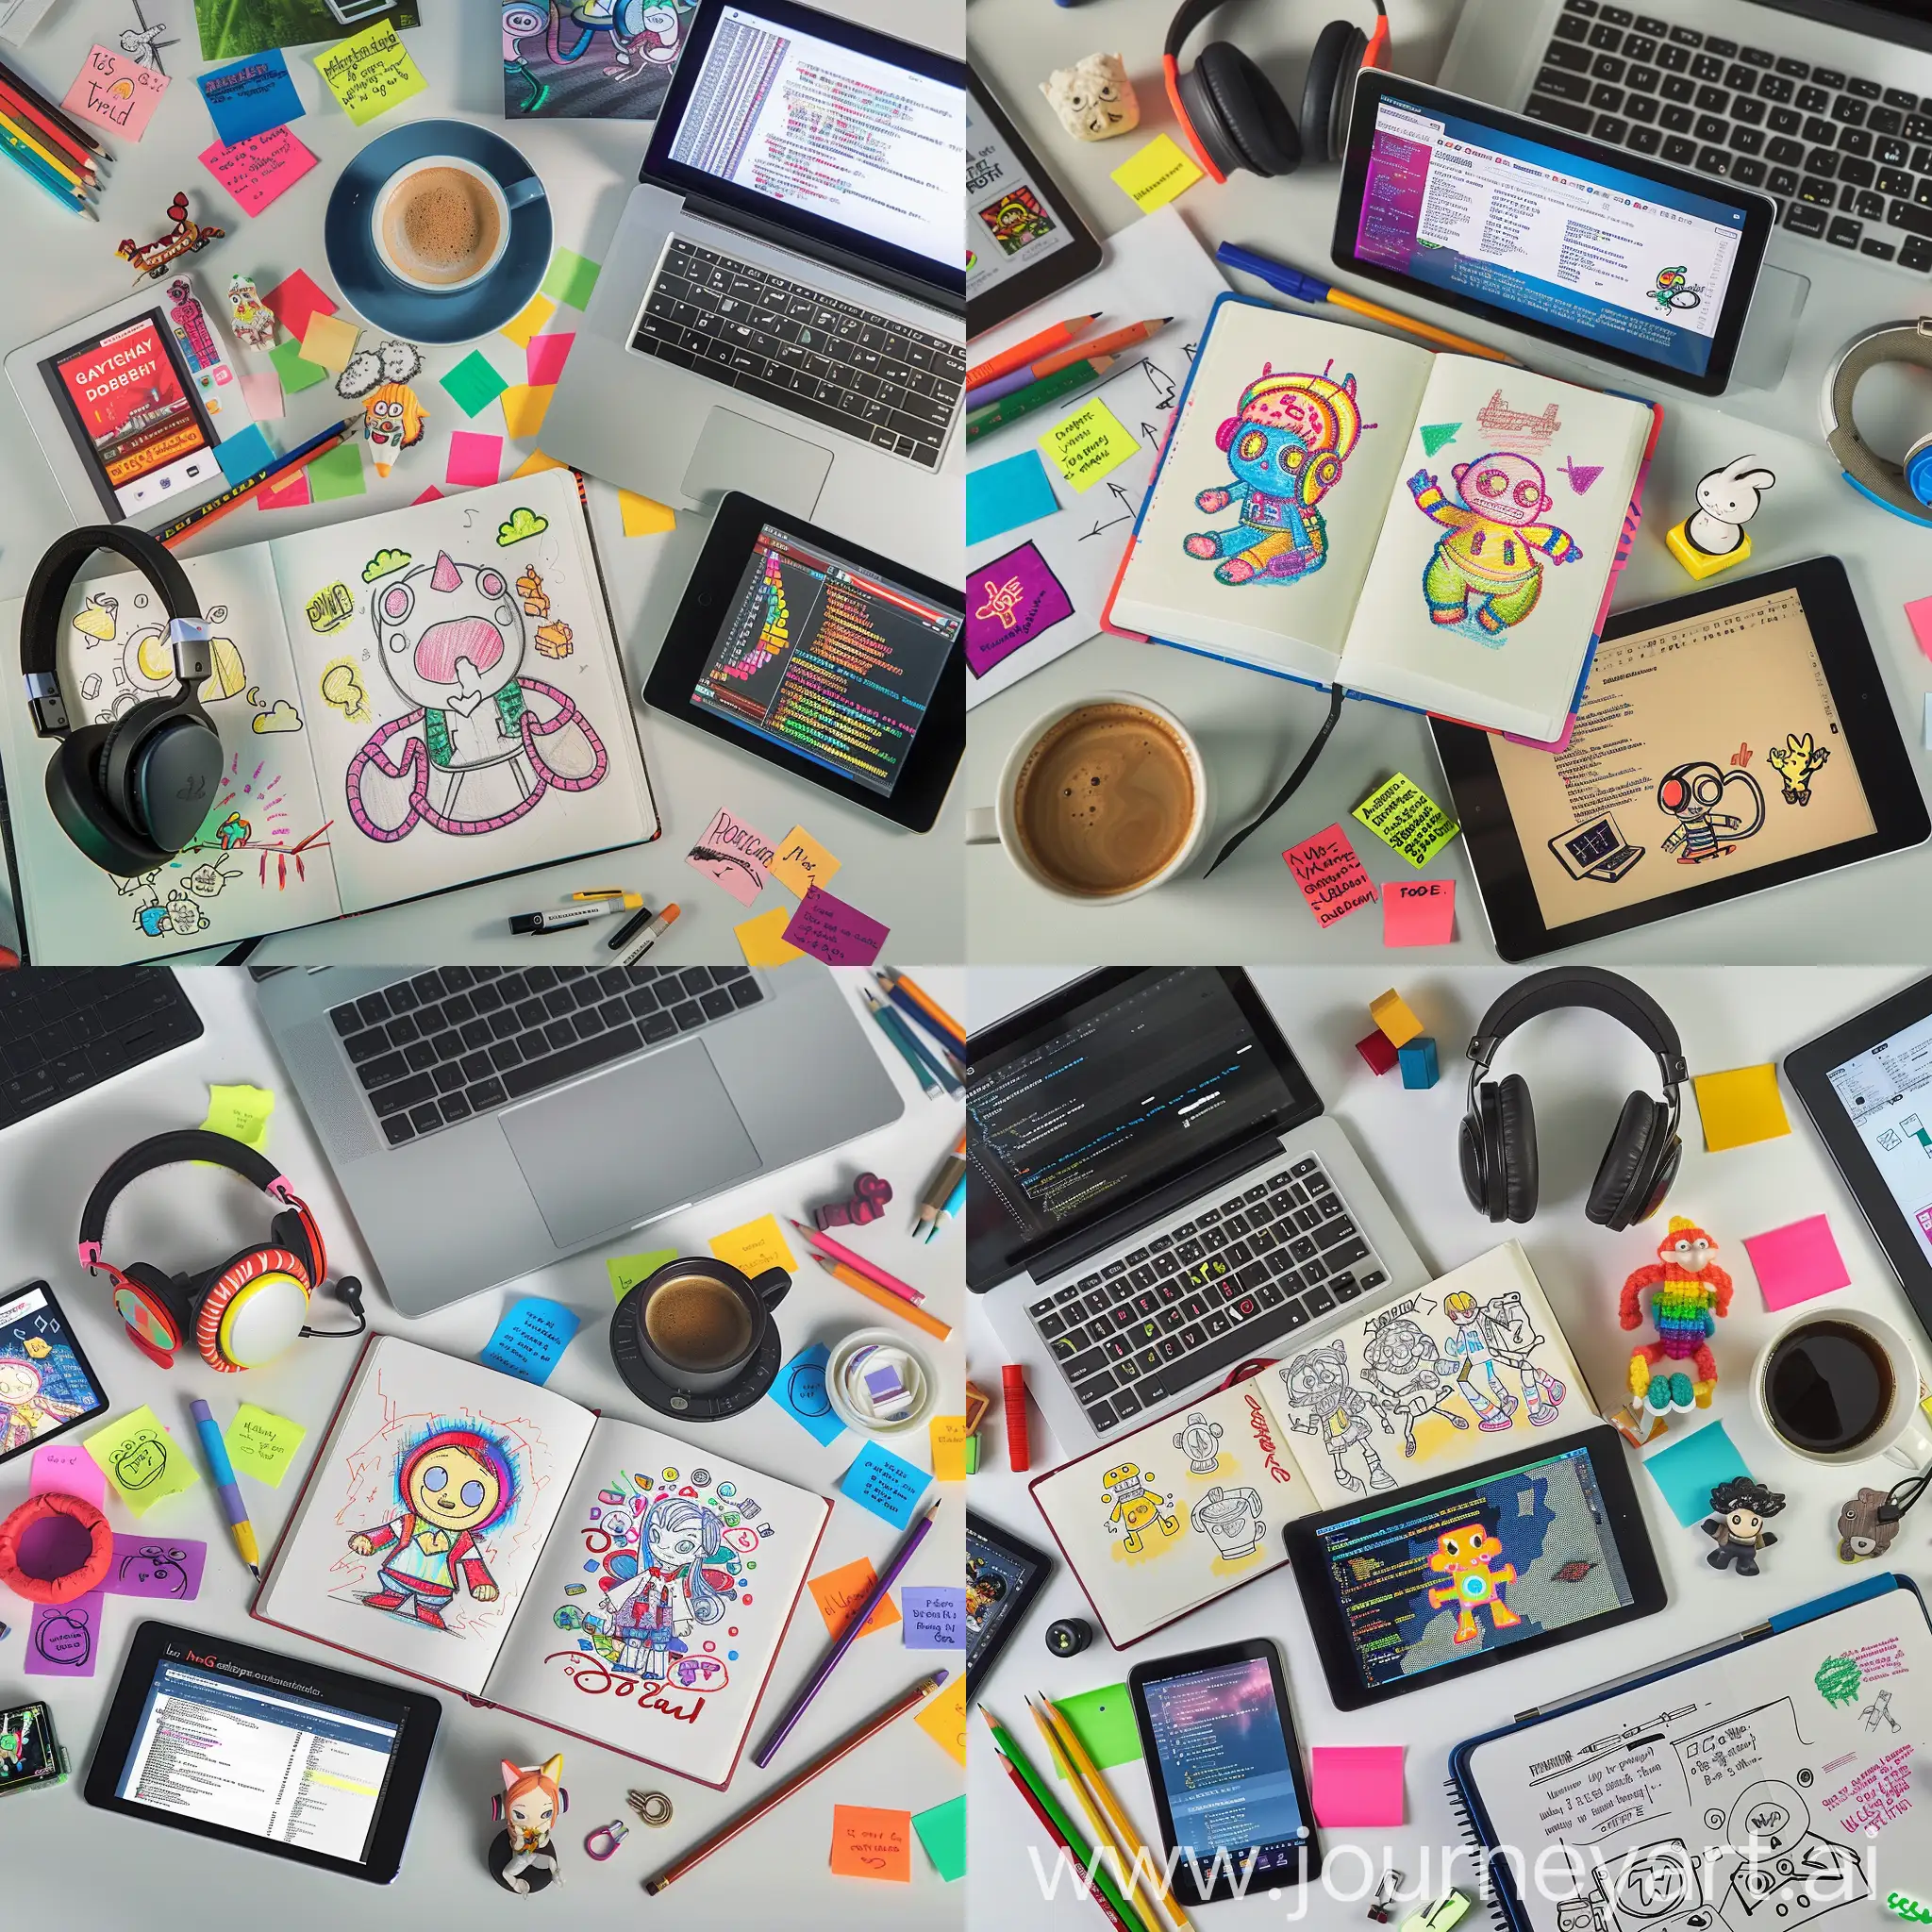  Prompt Text: A vibrant, flat-lay composition showcasing various creative tools and coding elements arranged on a clean desk.  In the center, a sketchbook filled with colorful sketches of a video game character design lies open next to a laptop displaying code. A pair of headphones rests nearby, and a cup of coffee sits beside a tablet displaying a website about game development.  Scattered around are various drawing tools like pencils and pens, alongside colorful sticky notes with written code snippets and project ideas. A small figurine related to the character sketch sits nestled among the items, symbolizing the connection between hobbies and projects.  The overall tone should be inspiring and visually appealing, capturing the essence of transforming personal interests into tangible tech projects through coding.